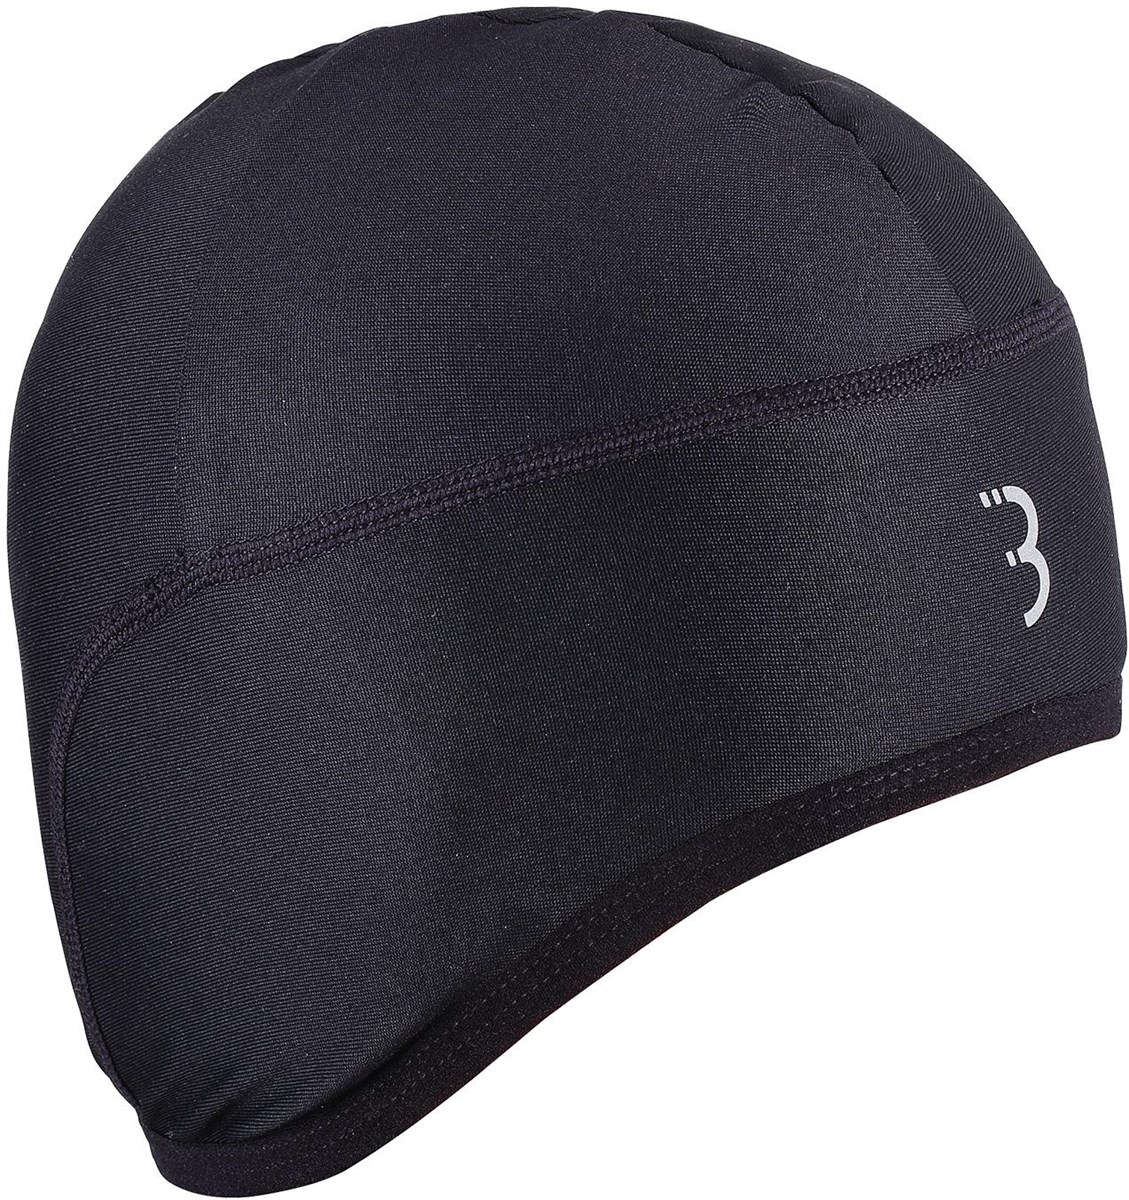 BBB Thermal Helmet Hat product image